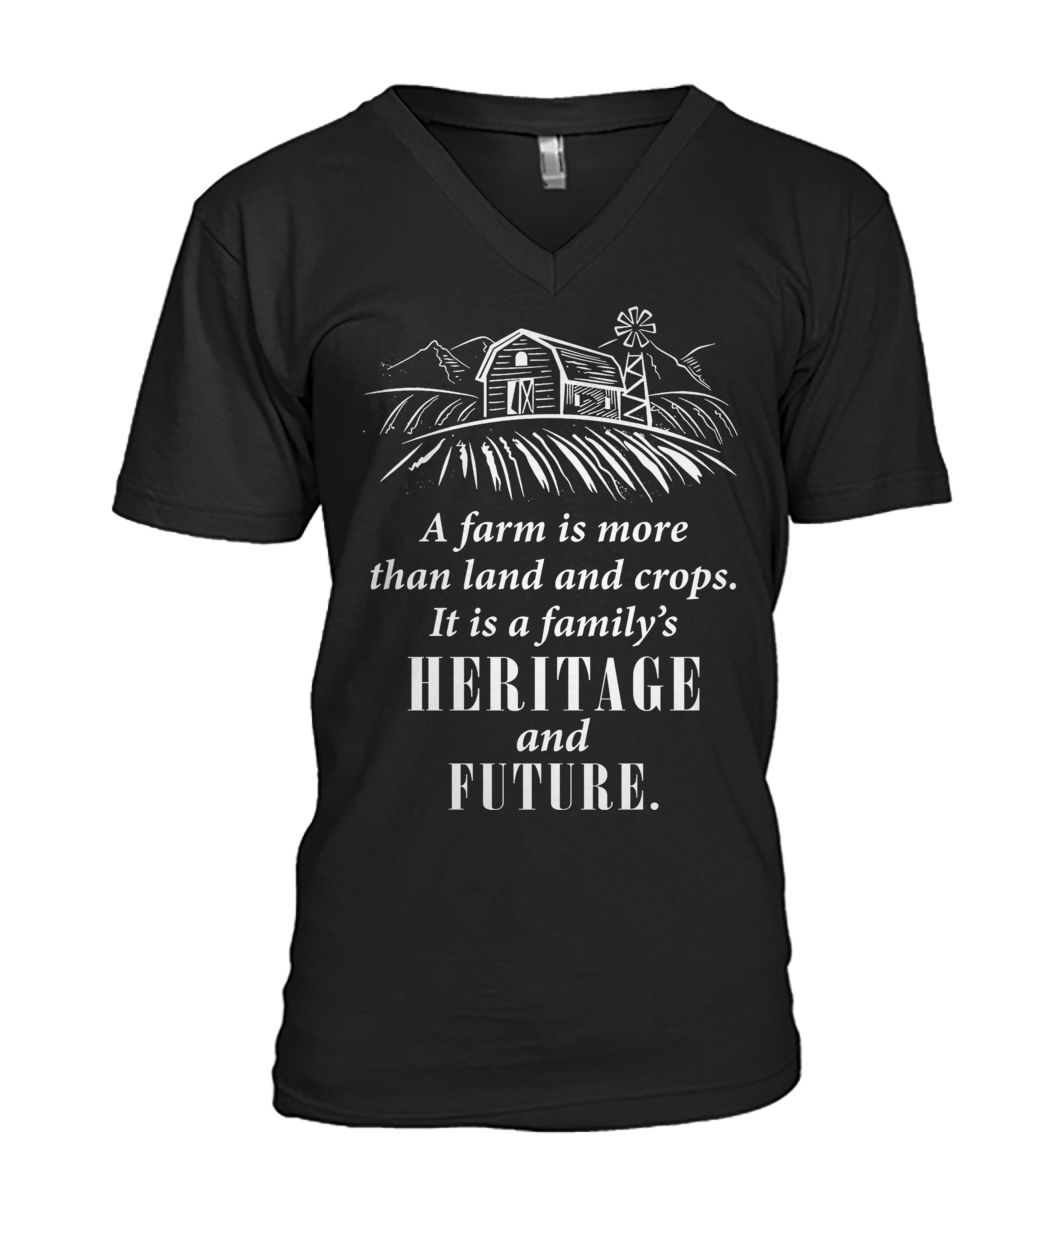 A farm is more than land and crops it is a family's heritage and future mens v-neck